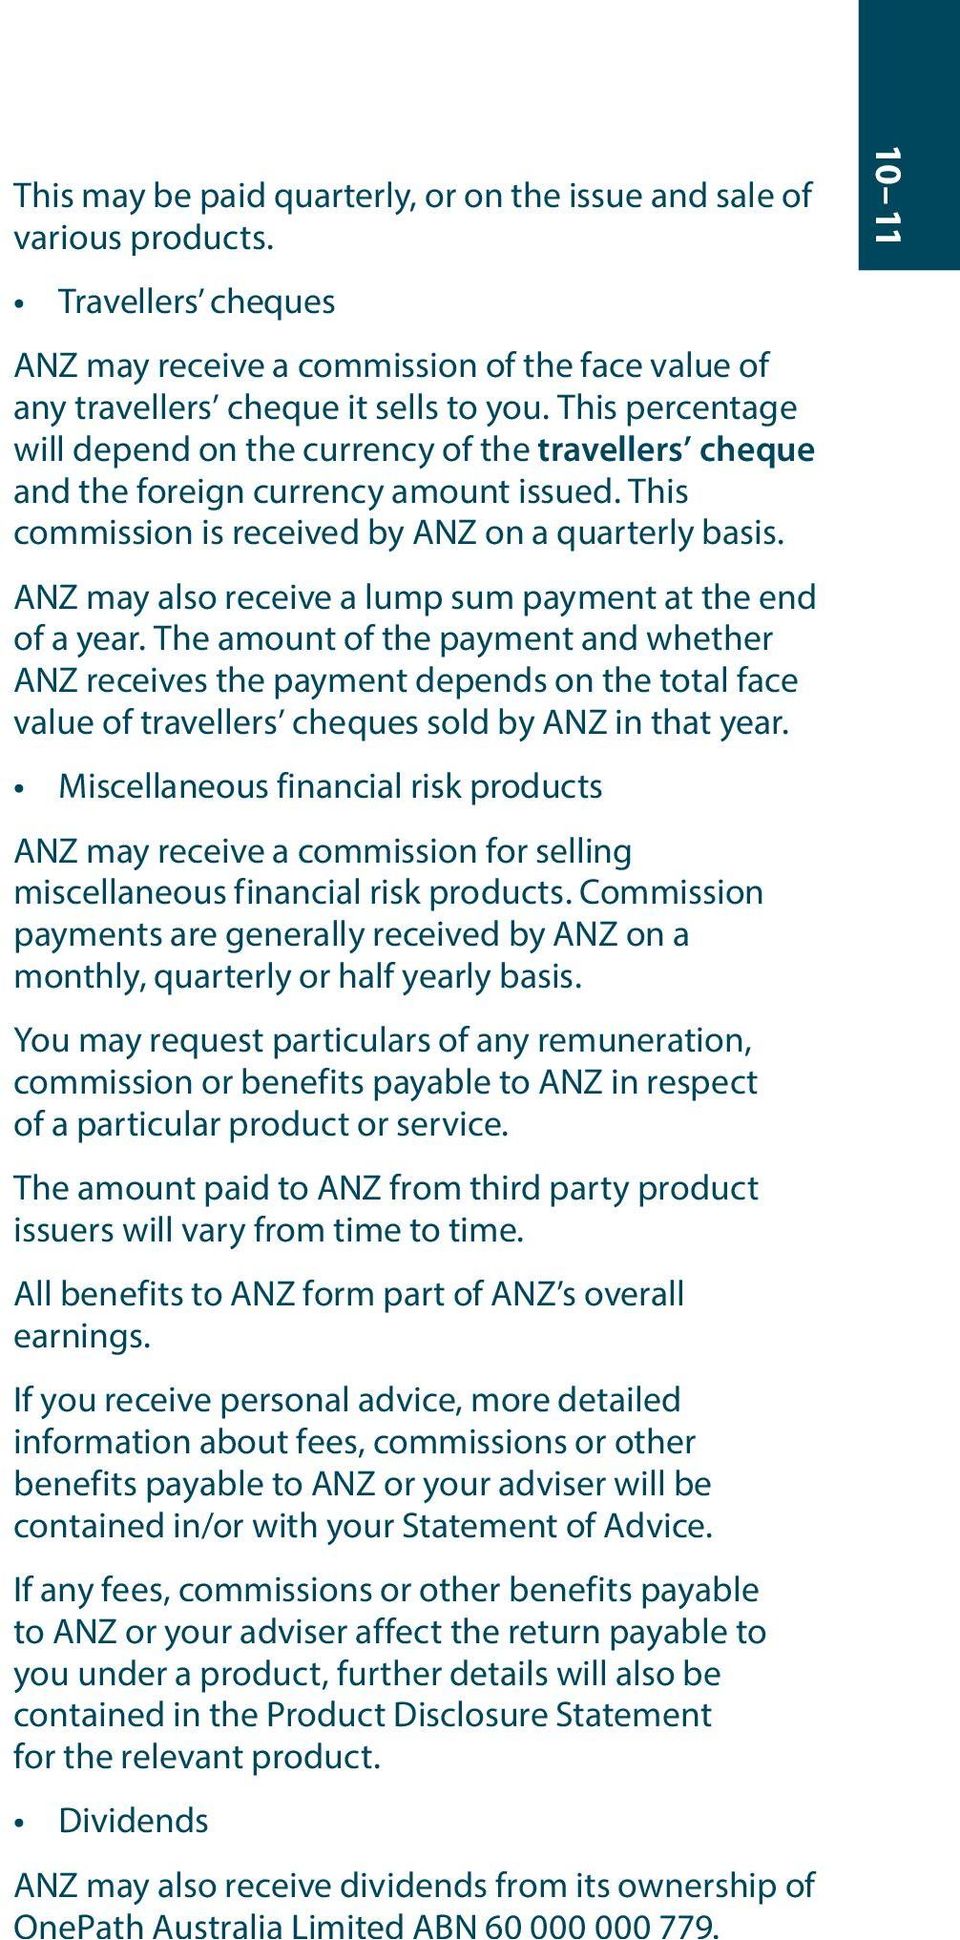 ANZ may also receive a lump sum payment at the end of a year.